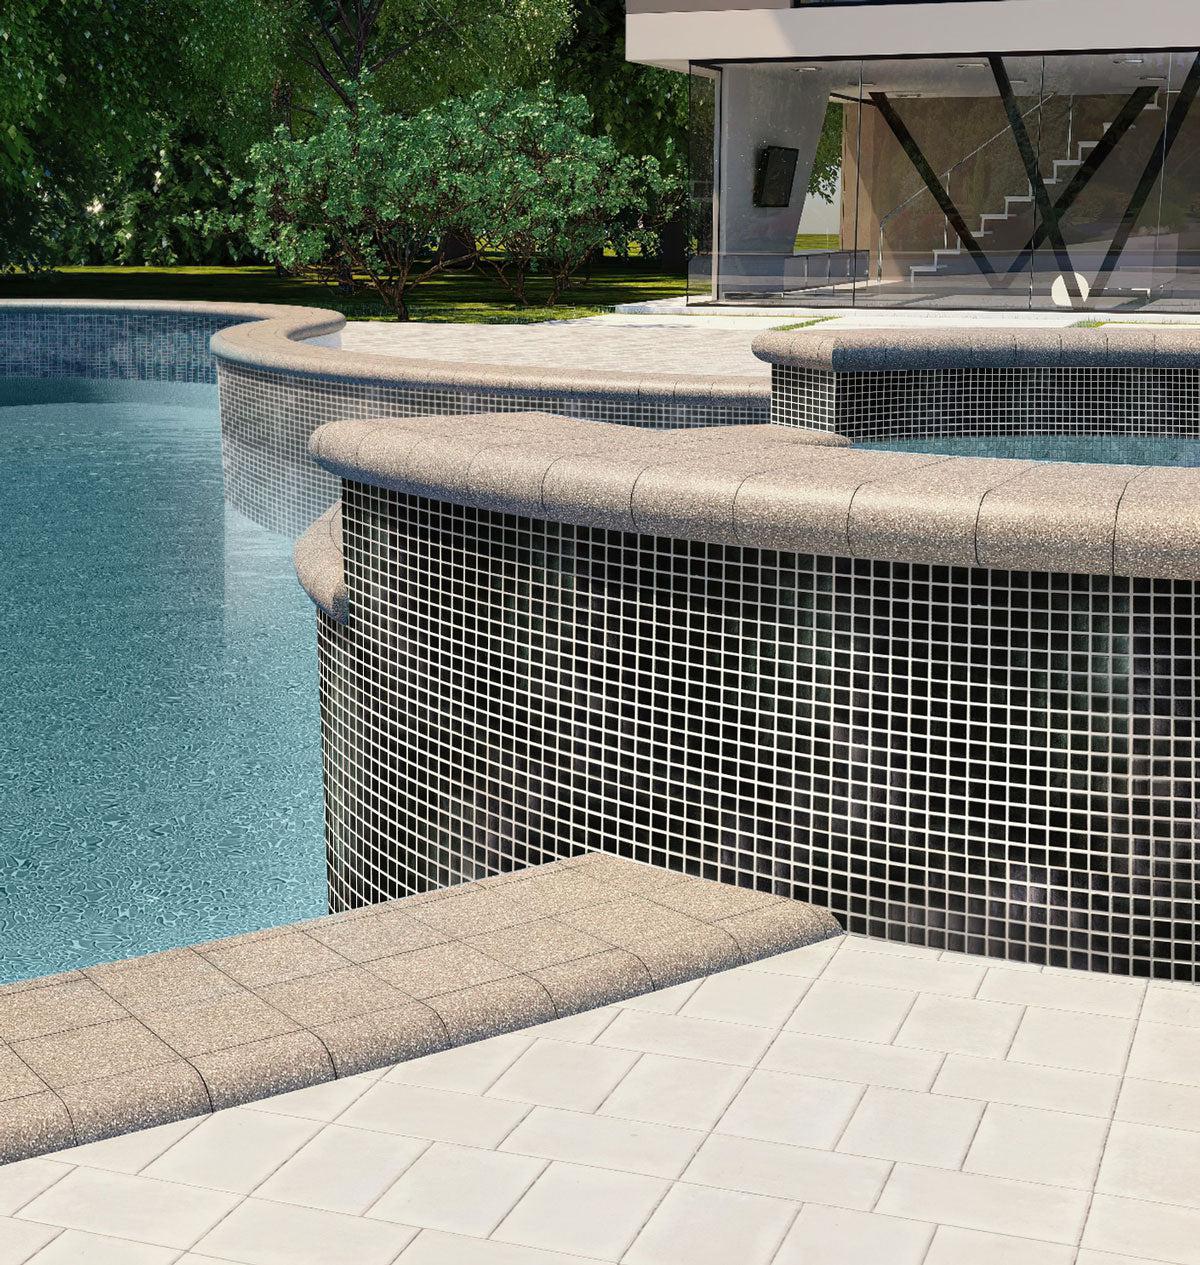 Space Black Squares Glass Pool Tile Finished Outdoor Poolside